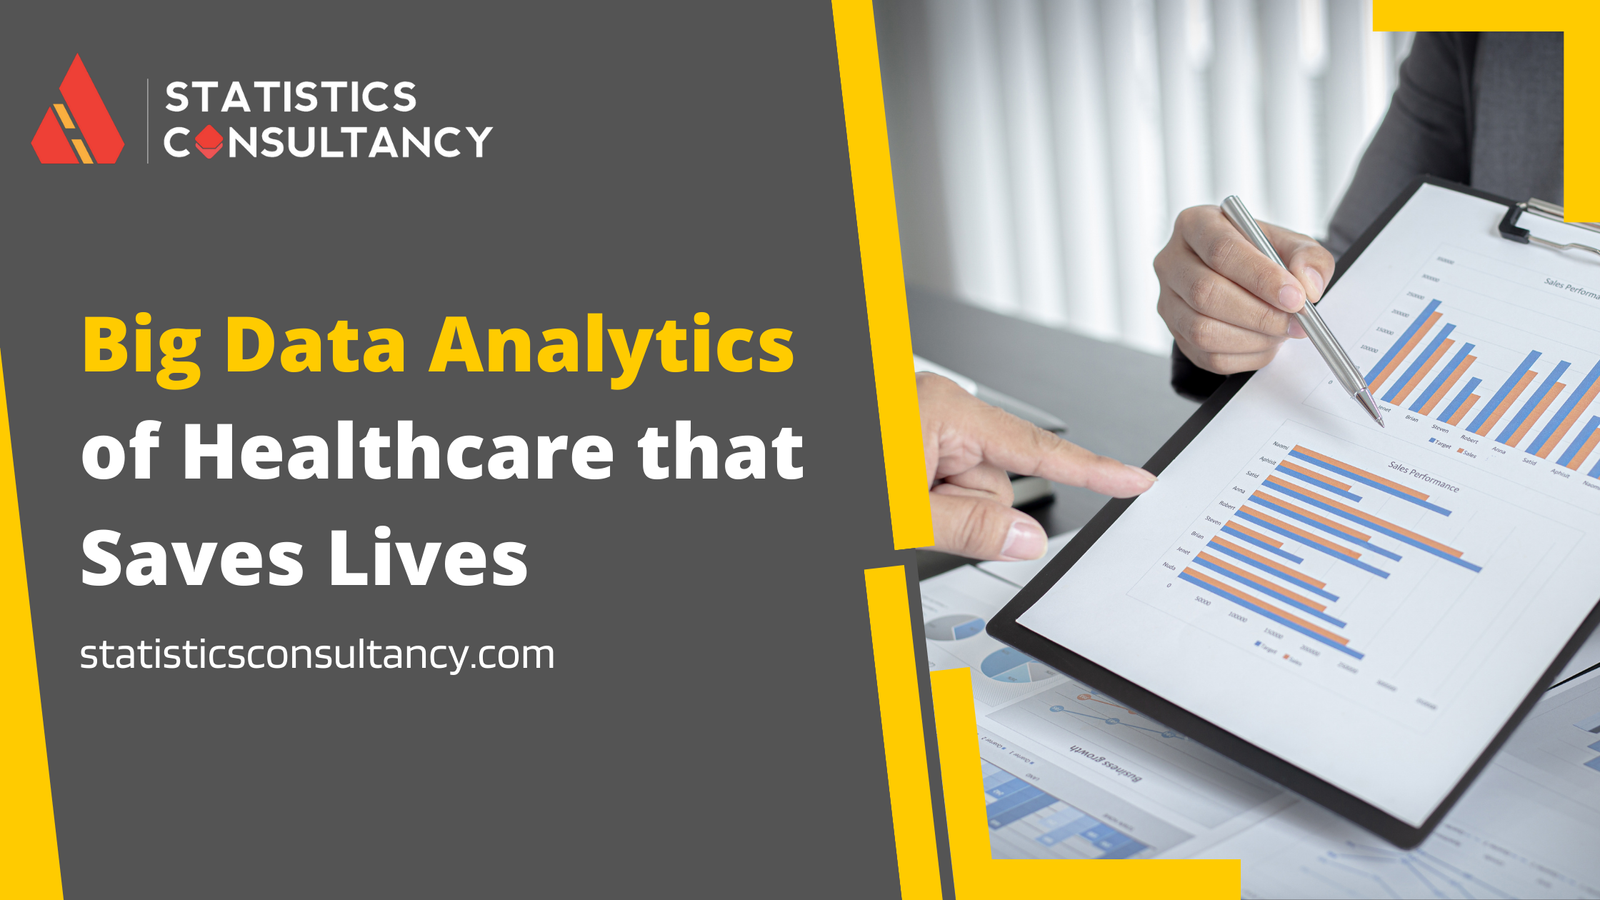 Big Data Analytics of Healthcare that Saves Lives